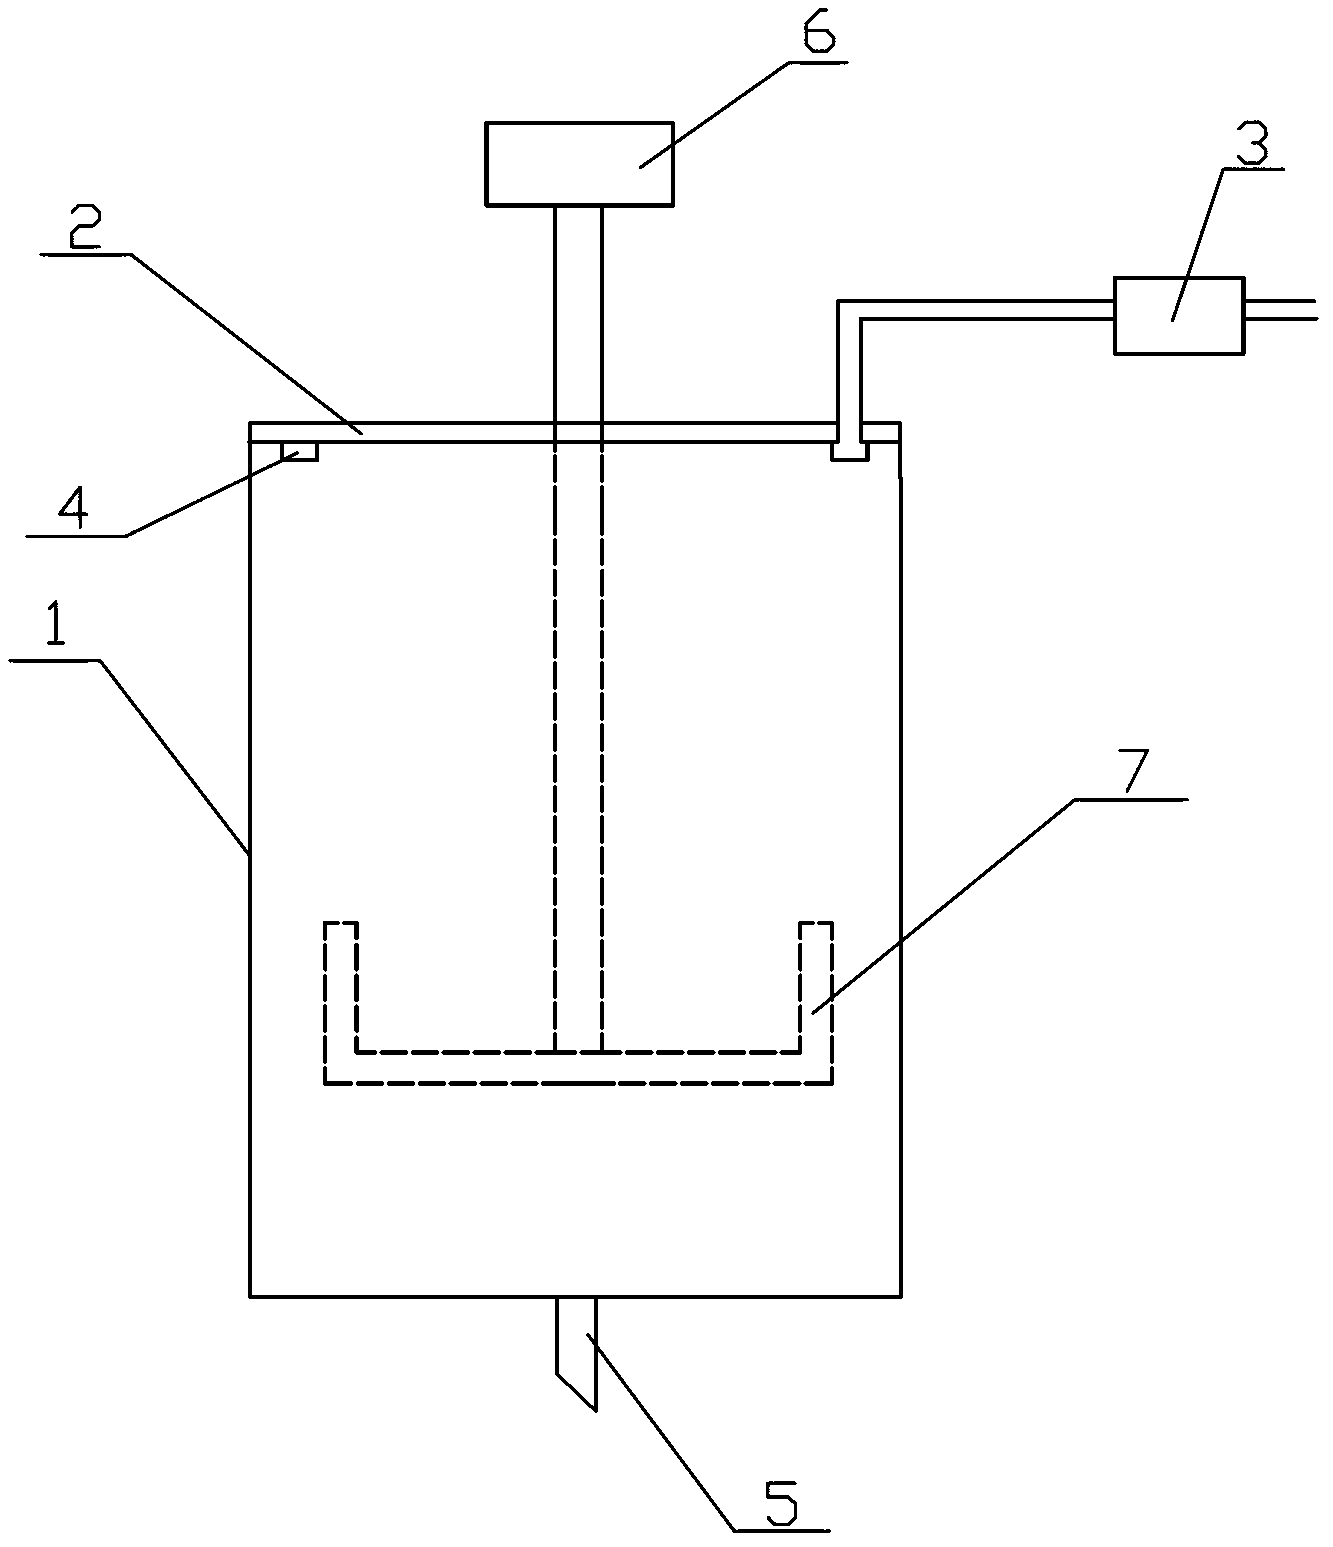 Reaction kettle used for realizing uniform reaction of internal liquid